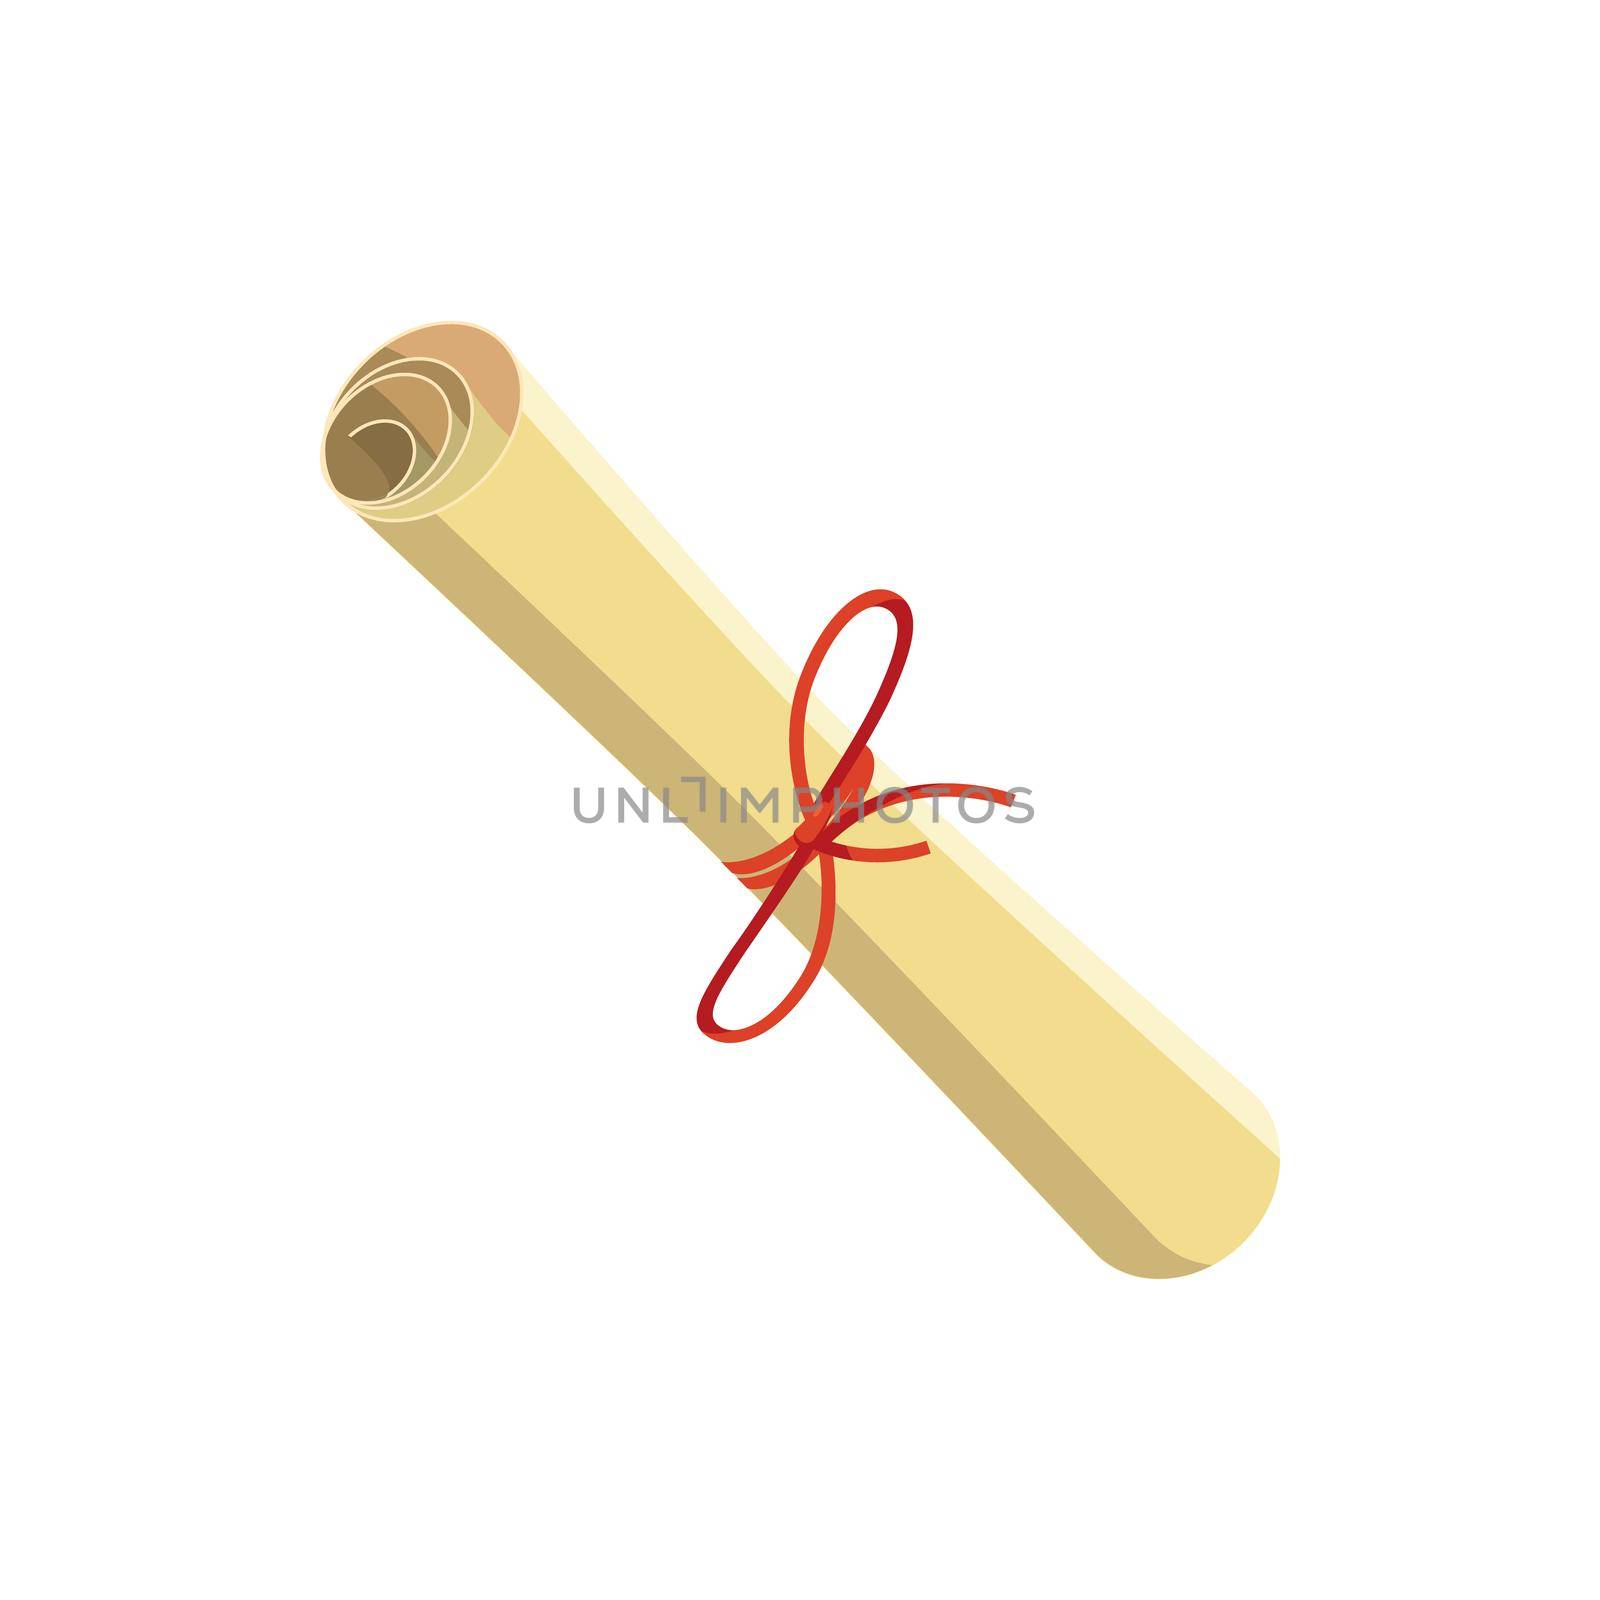 Rolled paper with red tape icon in cartoon style on a white background